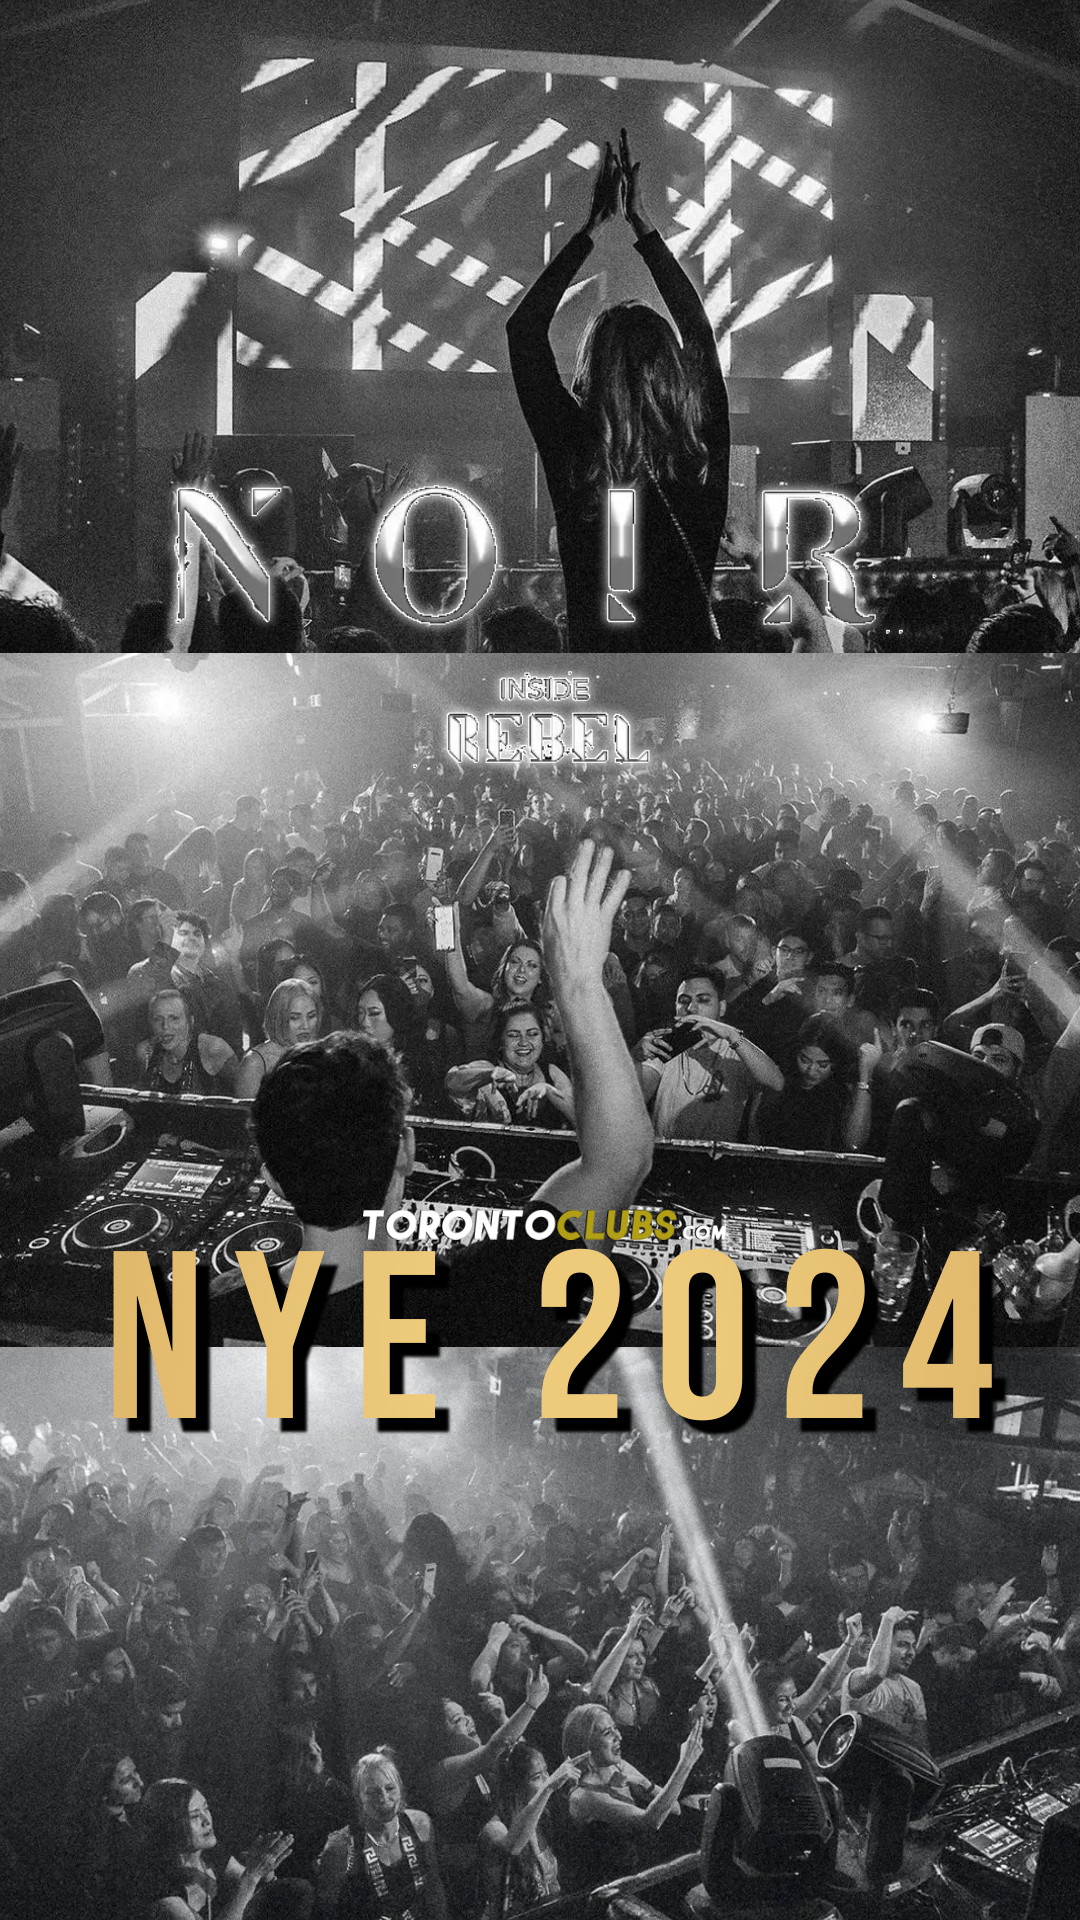 NOIR INSIDE REBEL TORONTO NEW YEARS EVE EVENT 2024 TECHNO & HOUSE PARTY